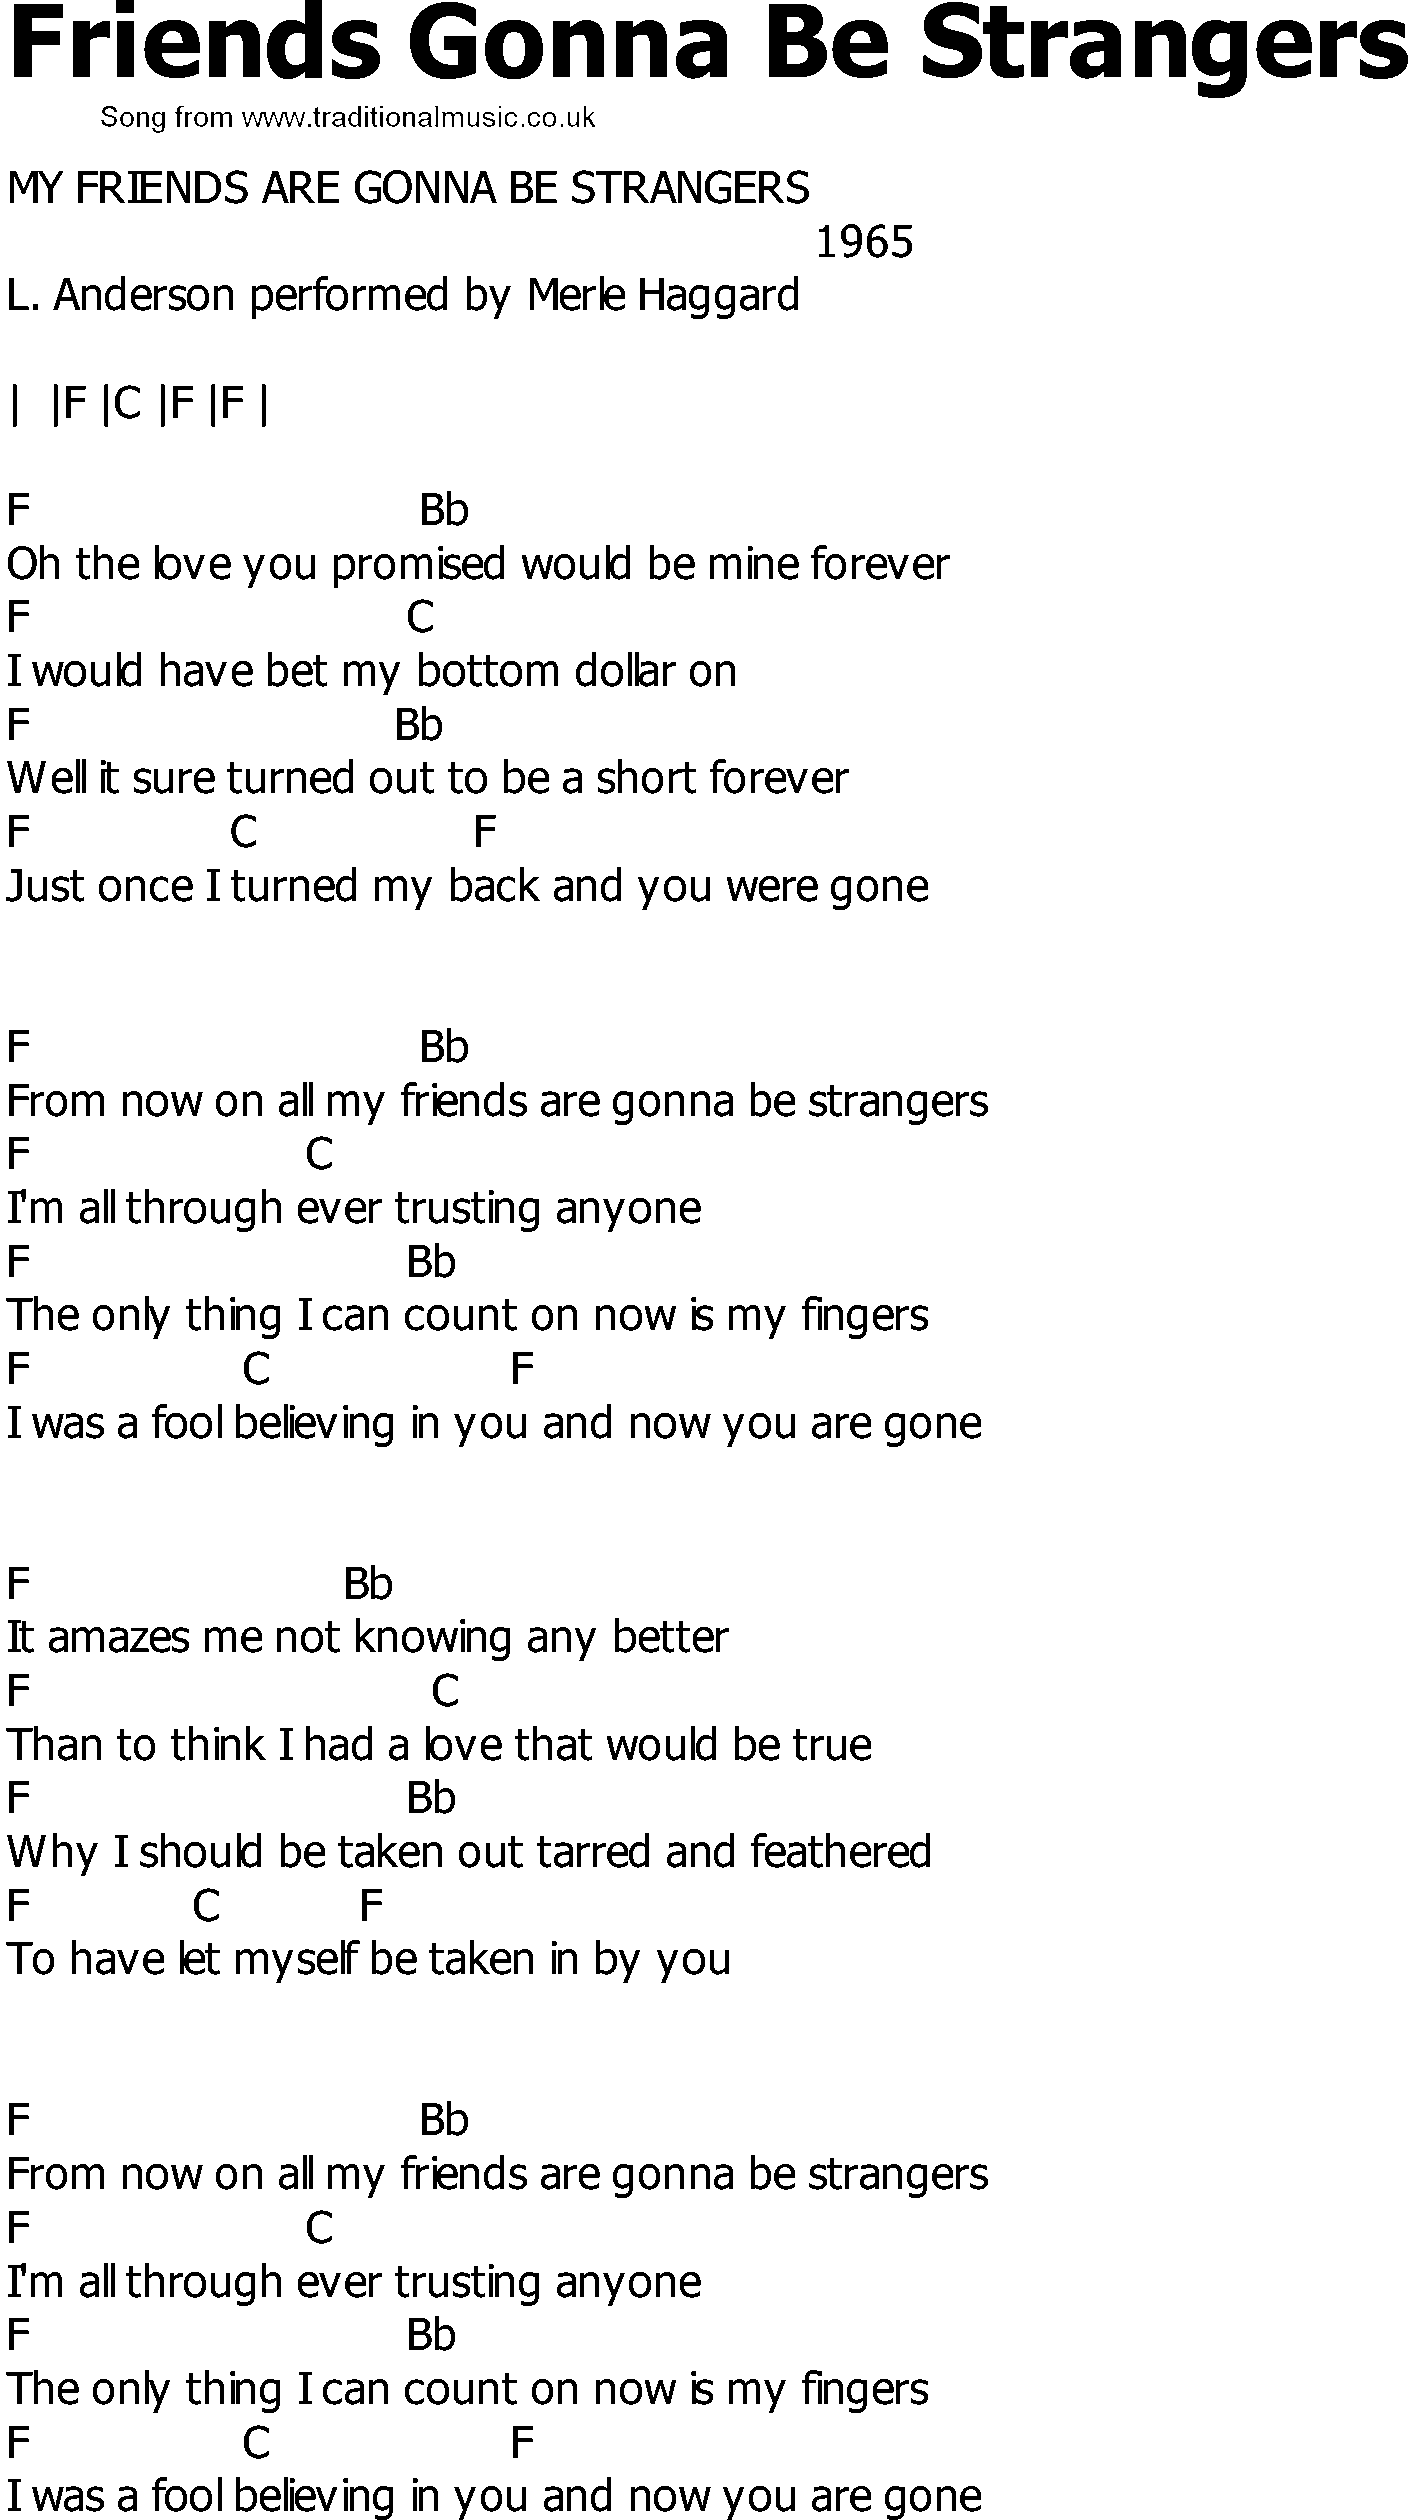 Old Country song lyrics with chords - Friends Gonna Be Strangers